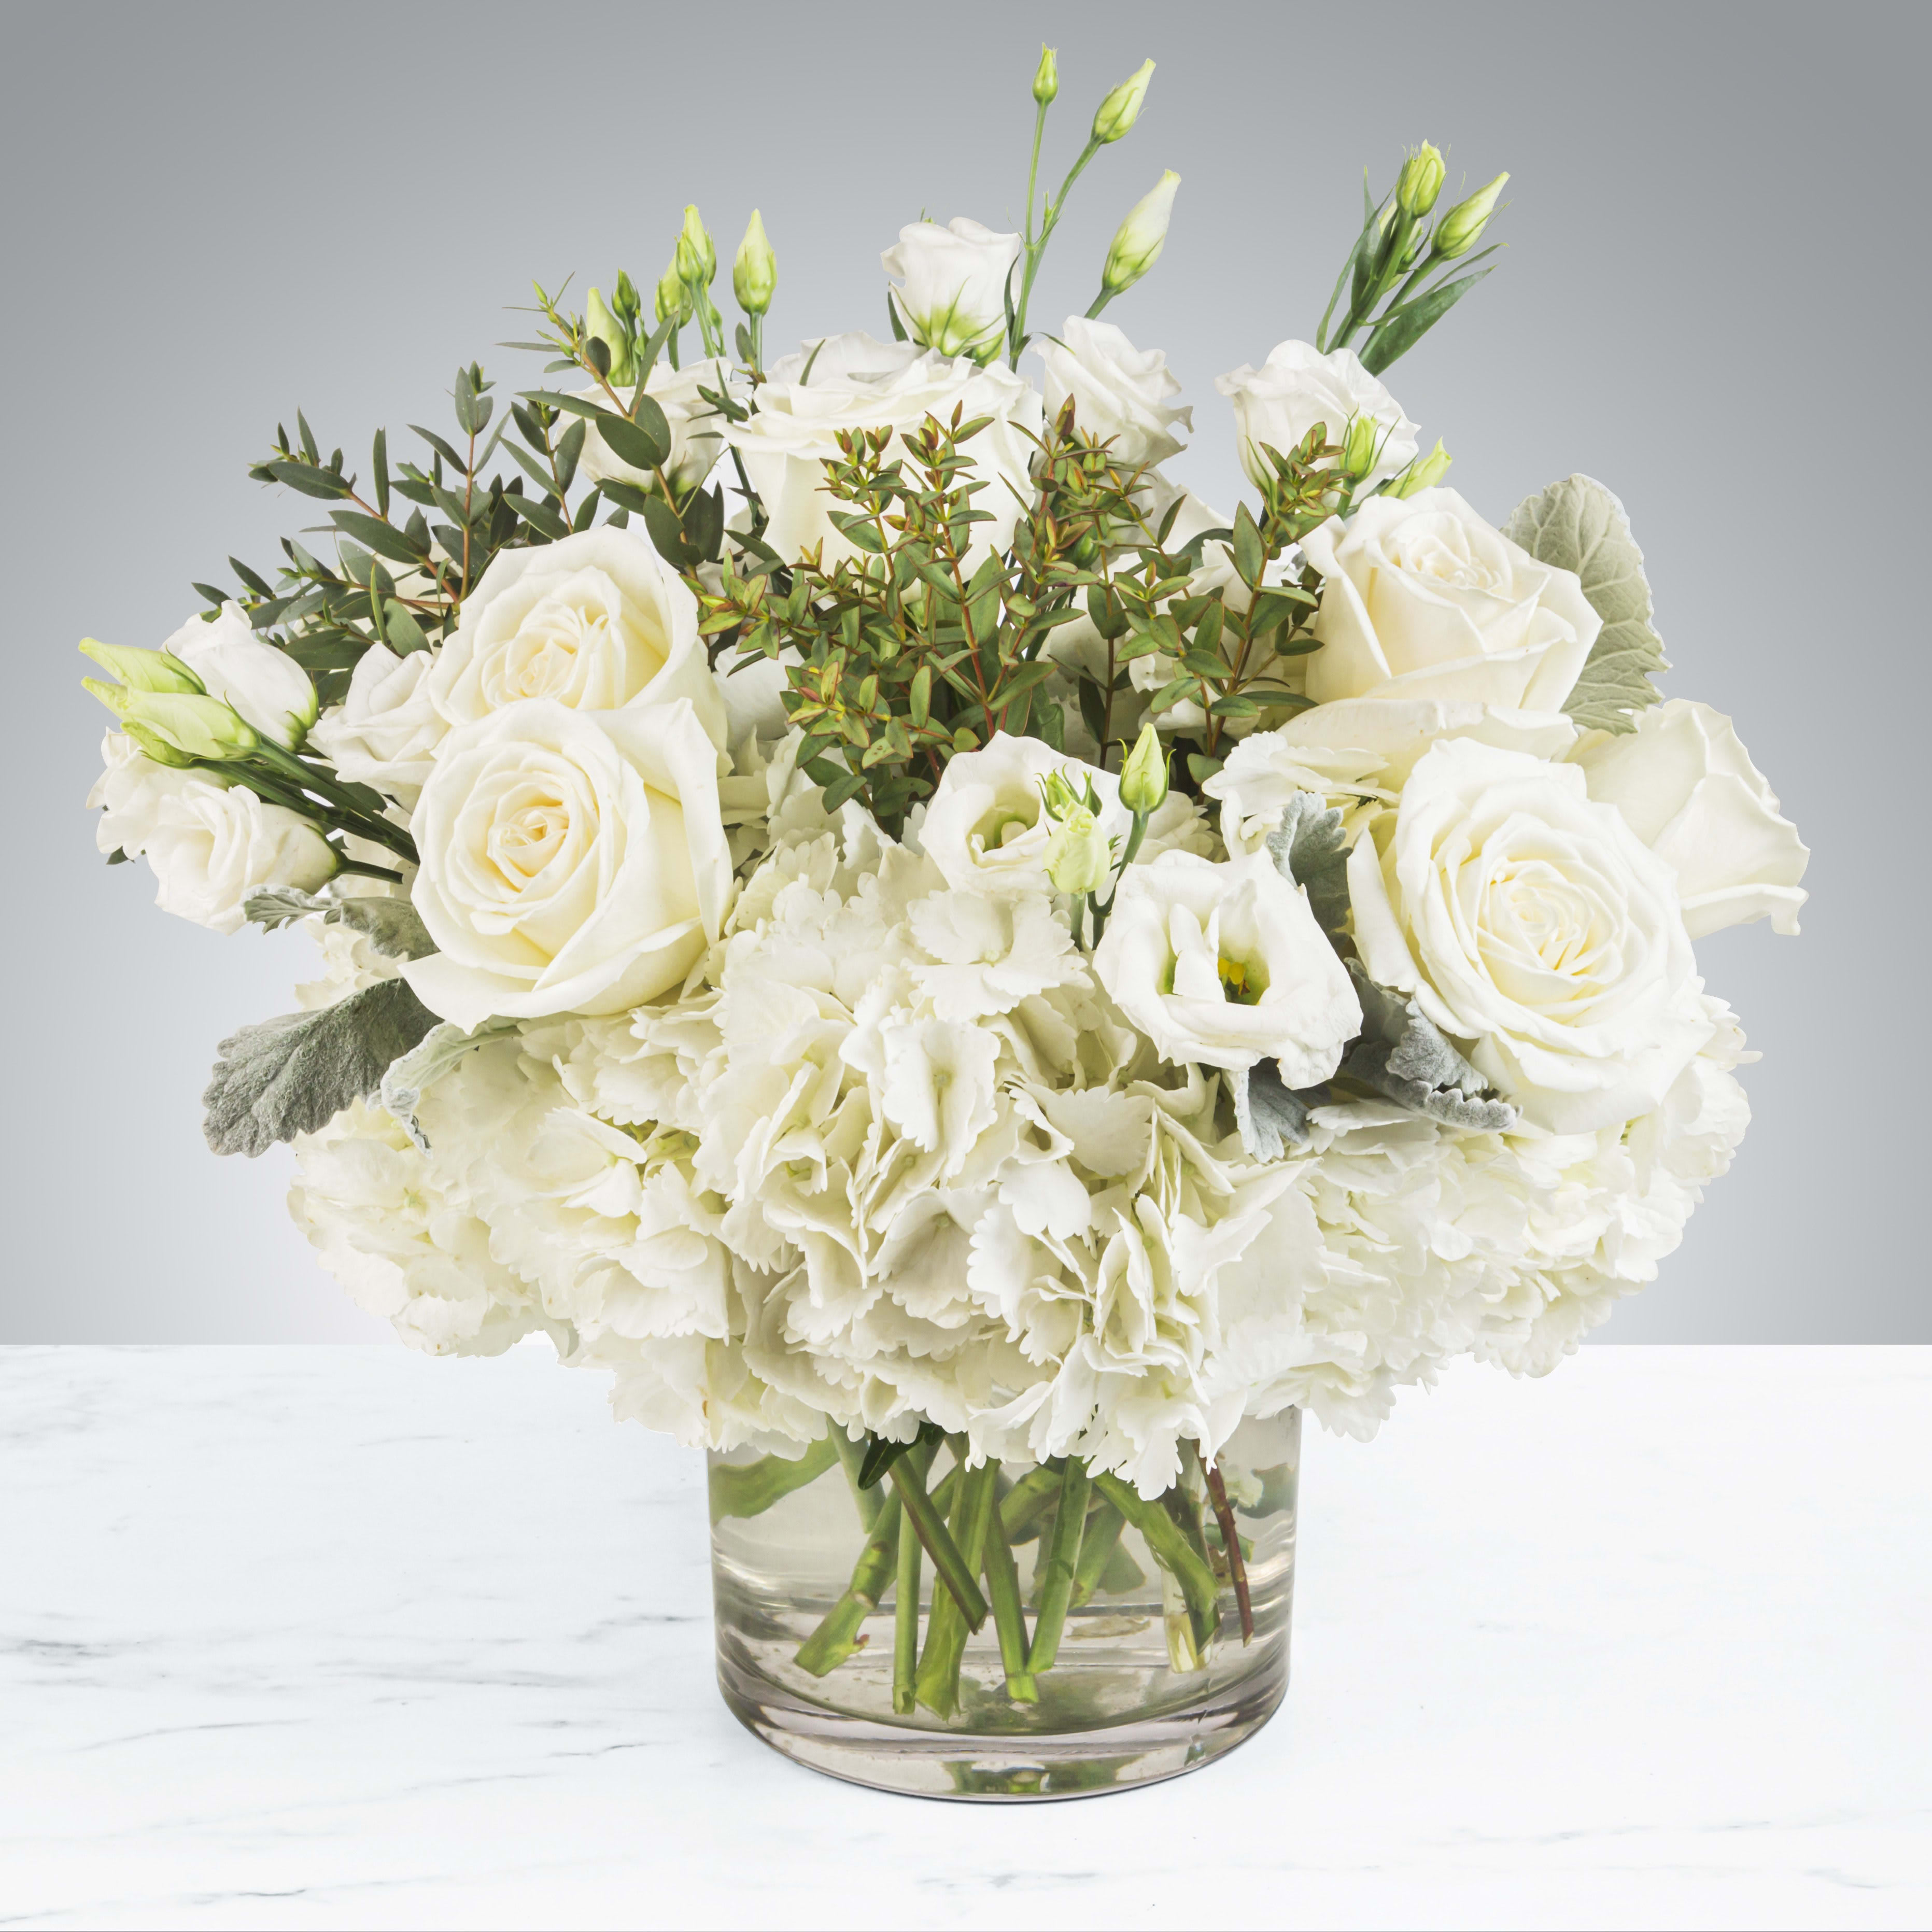 Cloud Nine by BloomNation™ - New beginnings deserve flowers! This all white arrangement includes roses, lisianthus and hydrangeas. Cloud Nine by BloomNation™ is the perfect gift for celebrating a new year, a new baby, or a newly married couple.   APPROXIMATE DIMENSIONS 15&quot; W X 13&quot; H